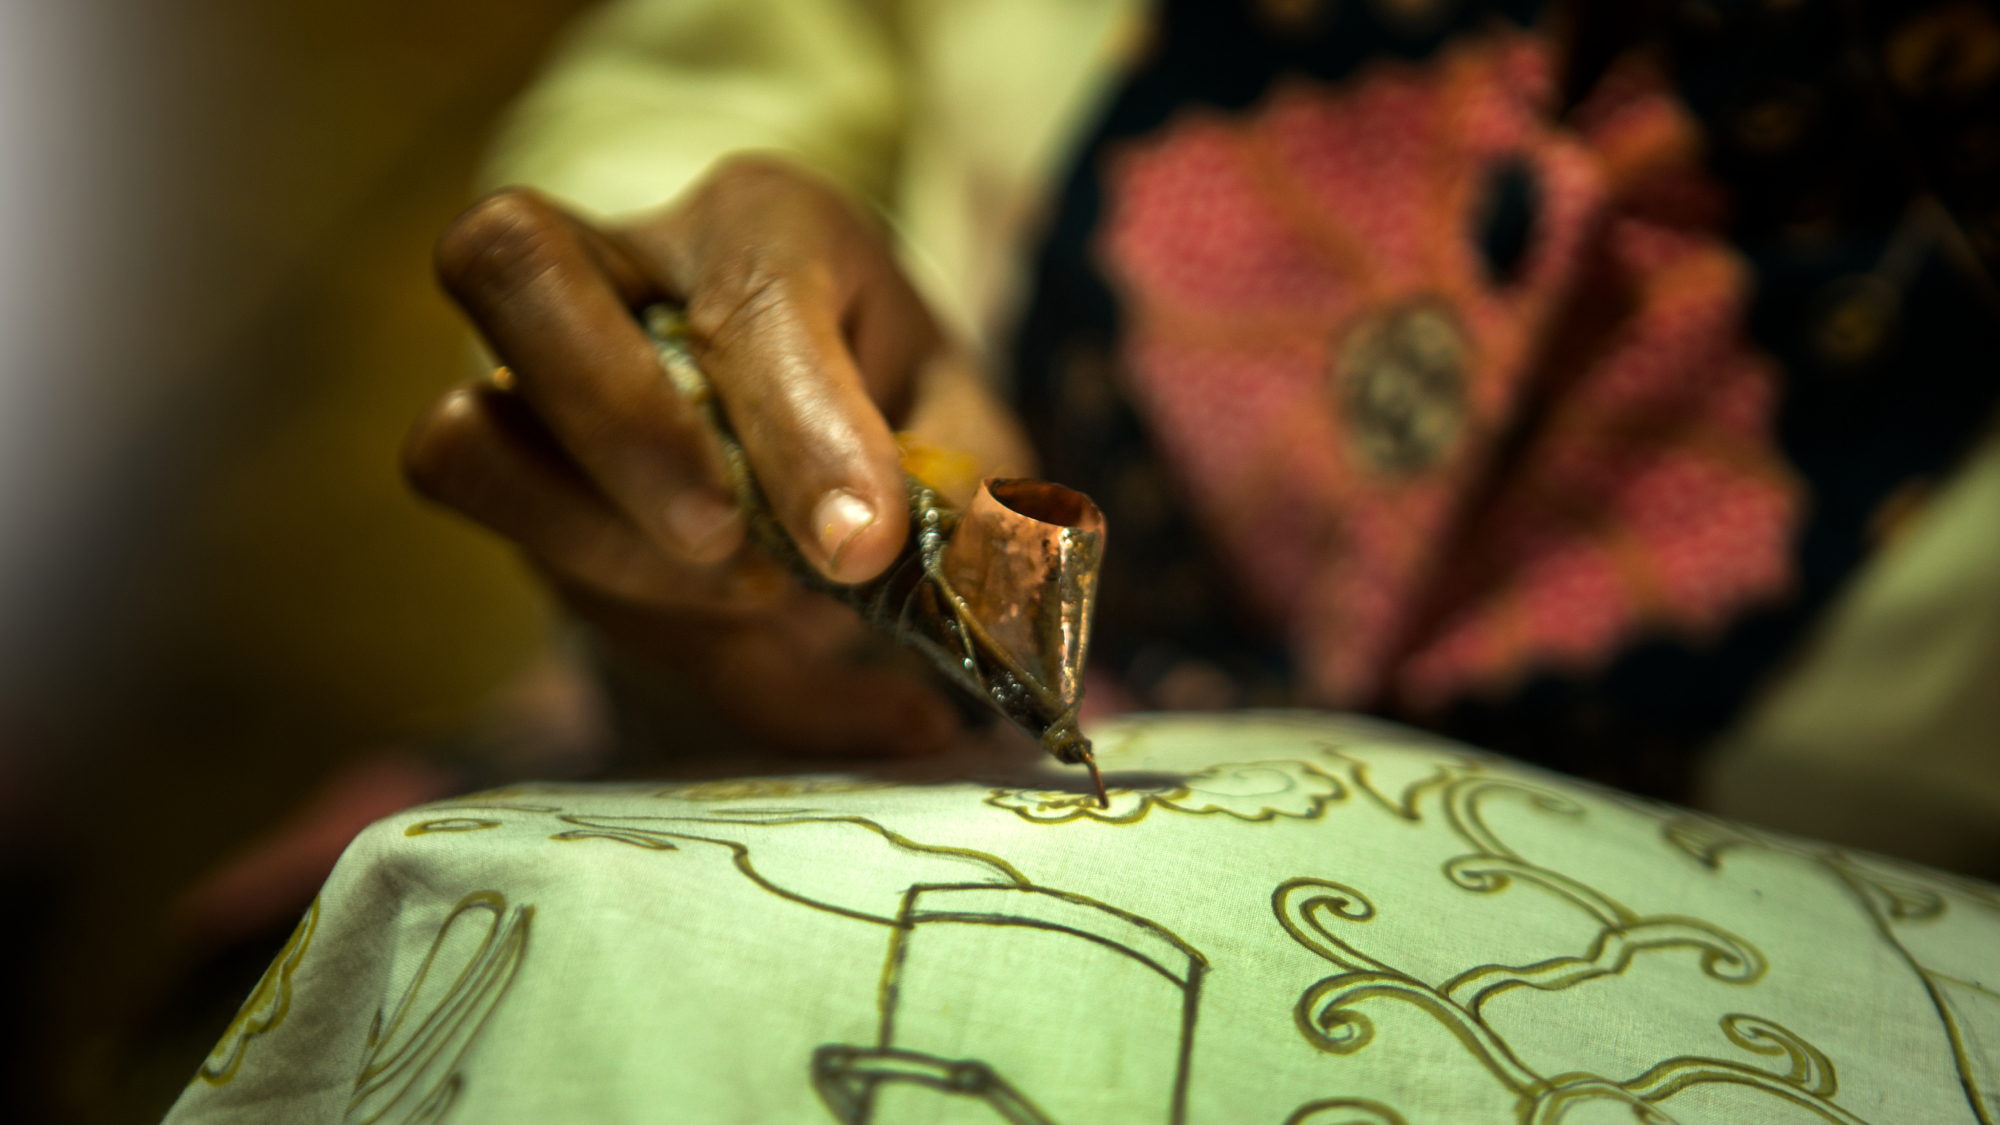 A person's hand holds a tool used to paint intricate designs on green fabric.